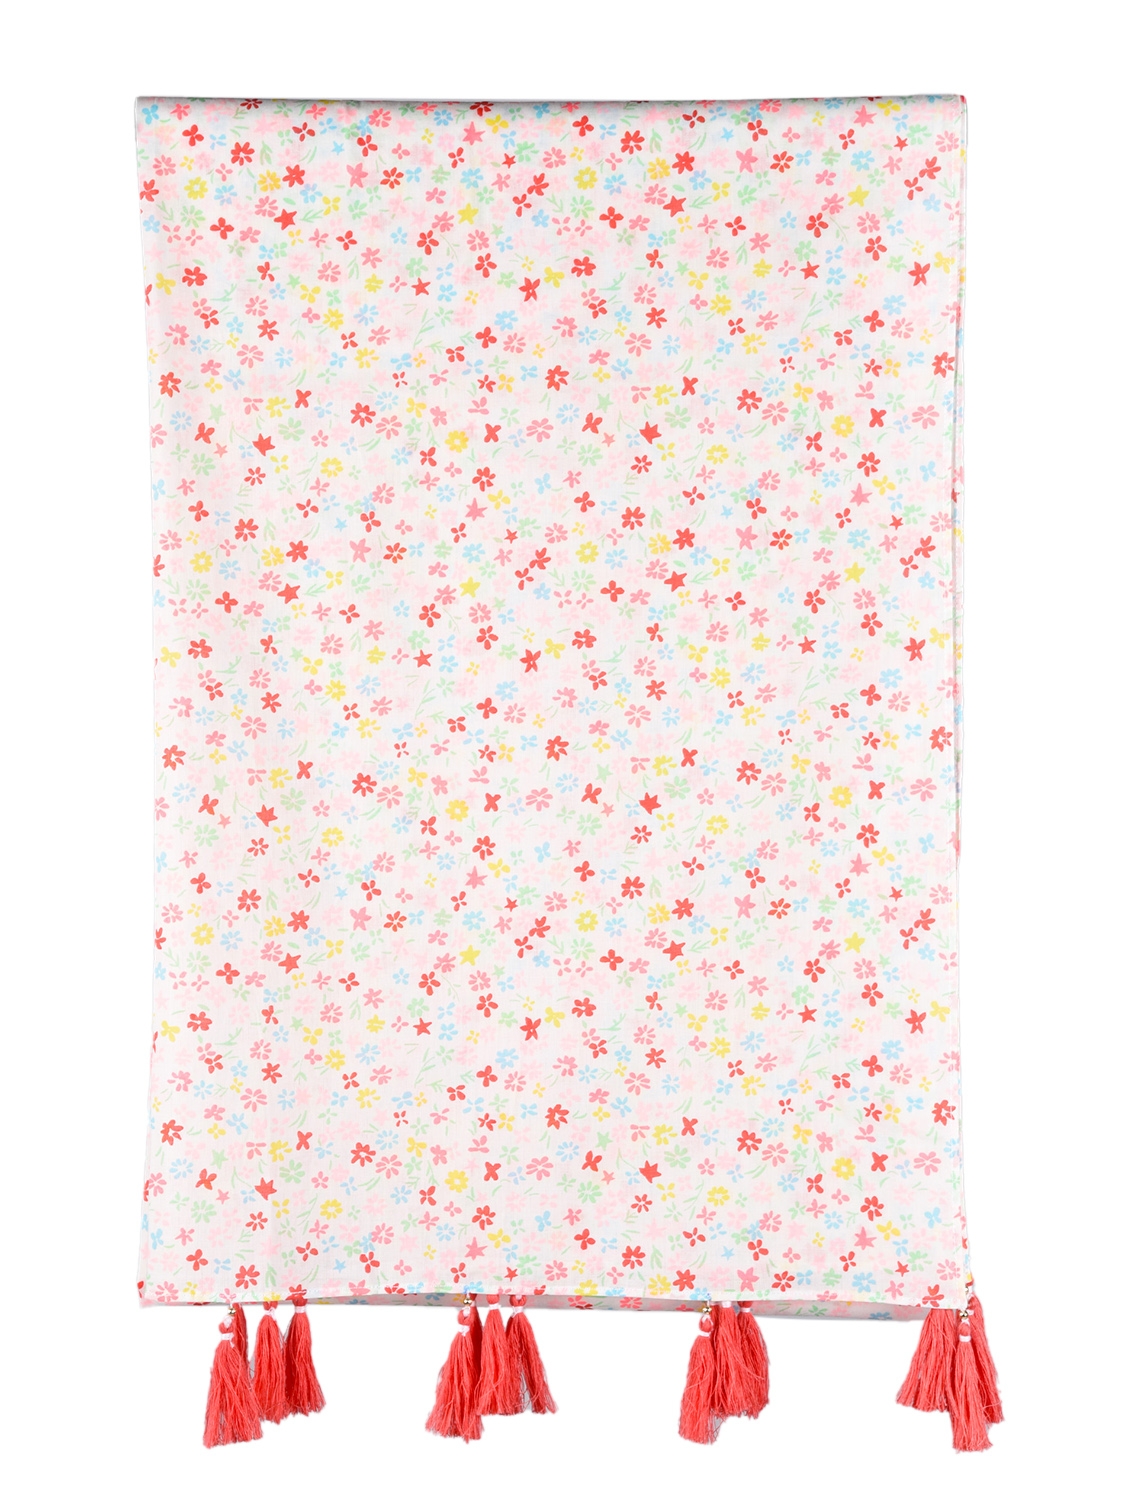 RHYSLEY | Rhysley Multi Coloured Floral Printed Pure cotton Voile Stole